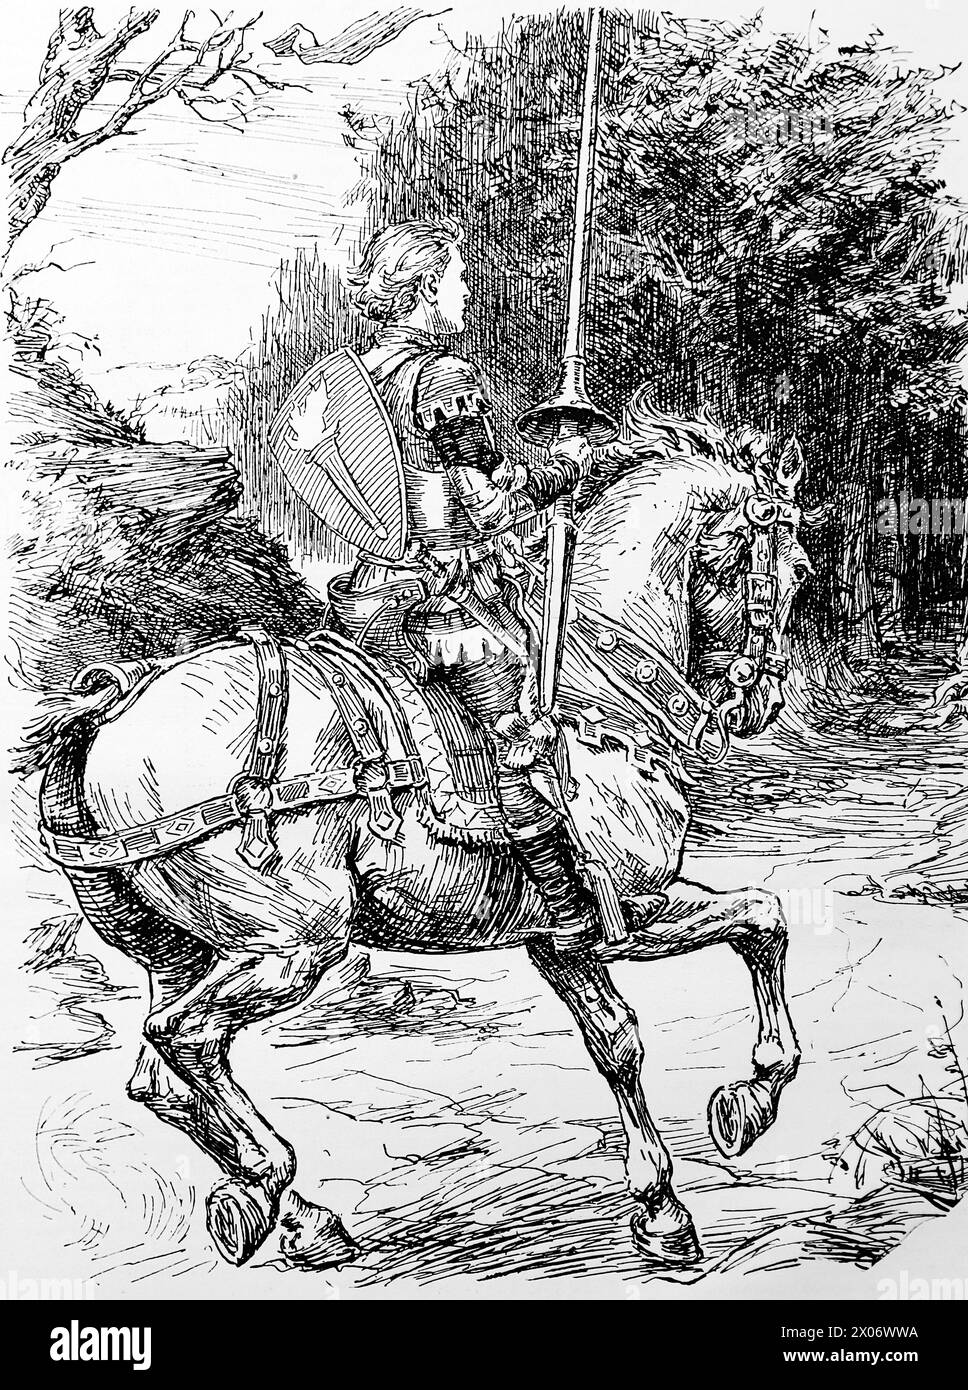 Youth and the Great Adventure, unattributed, 17 December 1924, featuring a knight in armour and with a lance, on horseback. Photograph from a line drawing originally printed in the Punch and London Charivari periodical in 1924. This is a good example of the skilful artists and the humour and satire of the time. Stock Photo